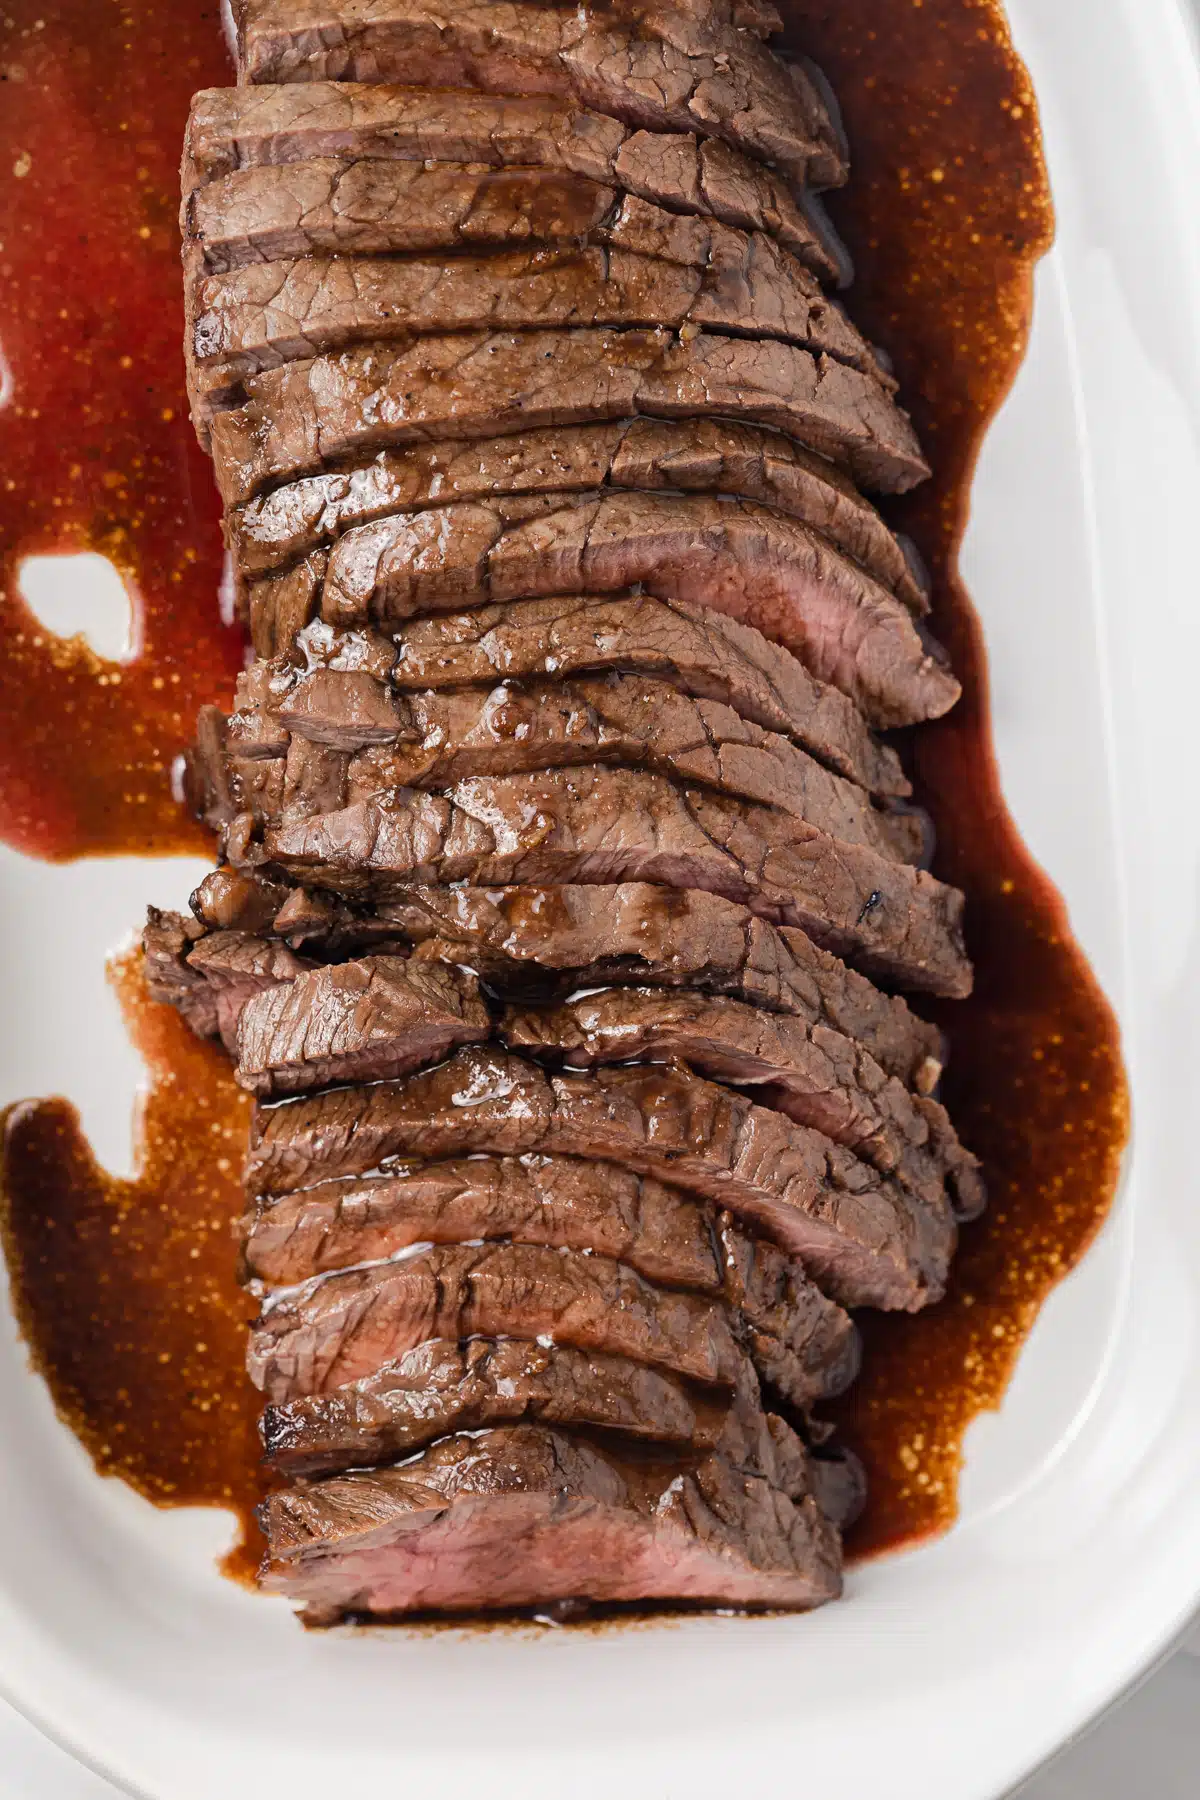 Marinated london broil in a baking dish.